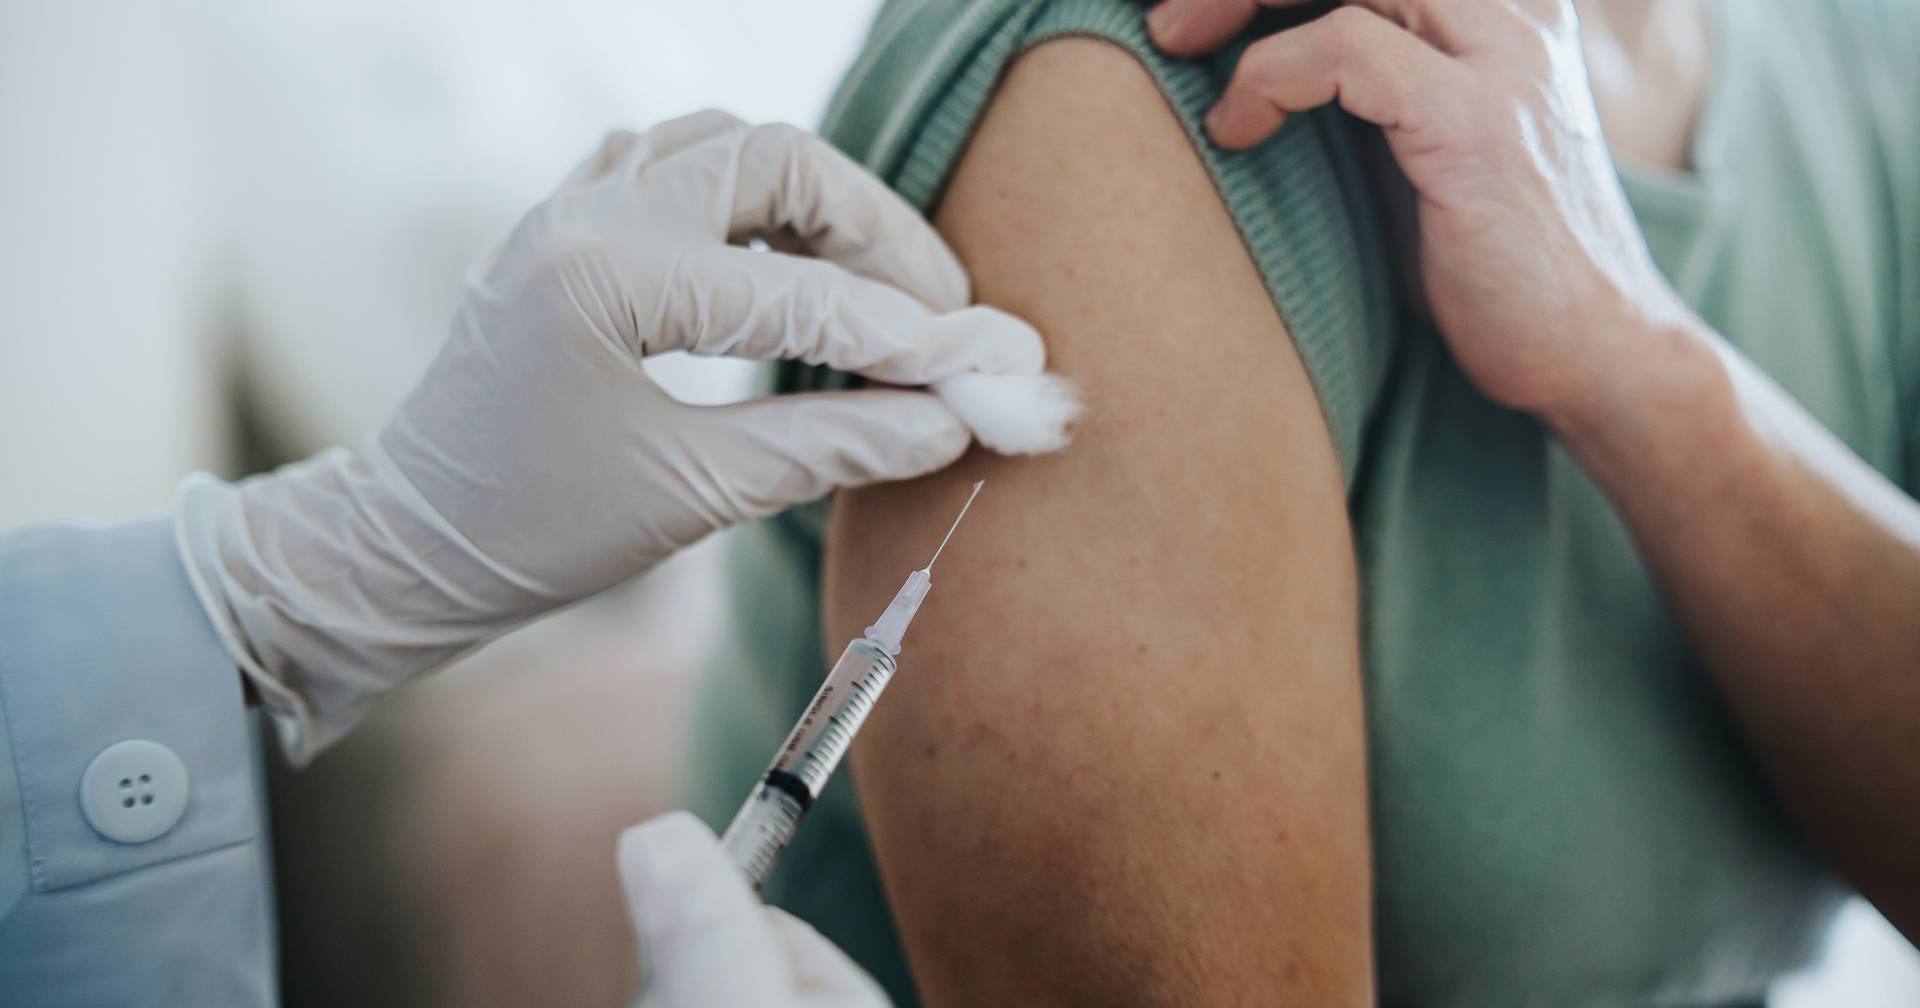 Vaccinations for influenza and COVID-19 begin Friday